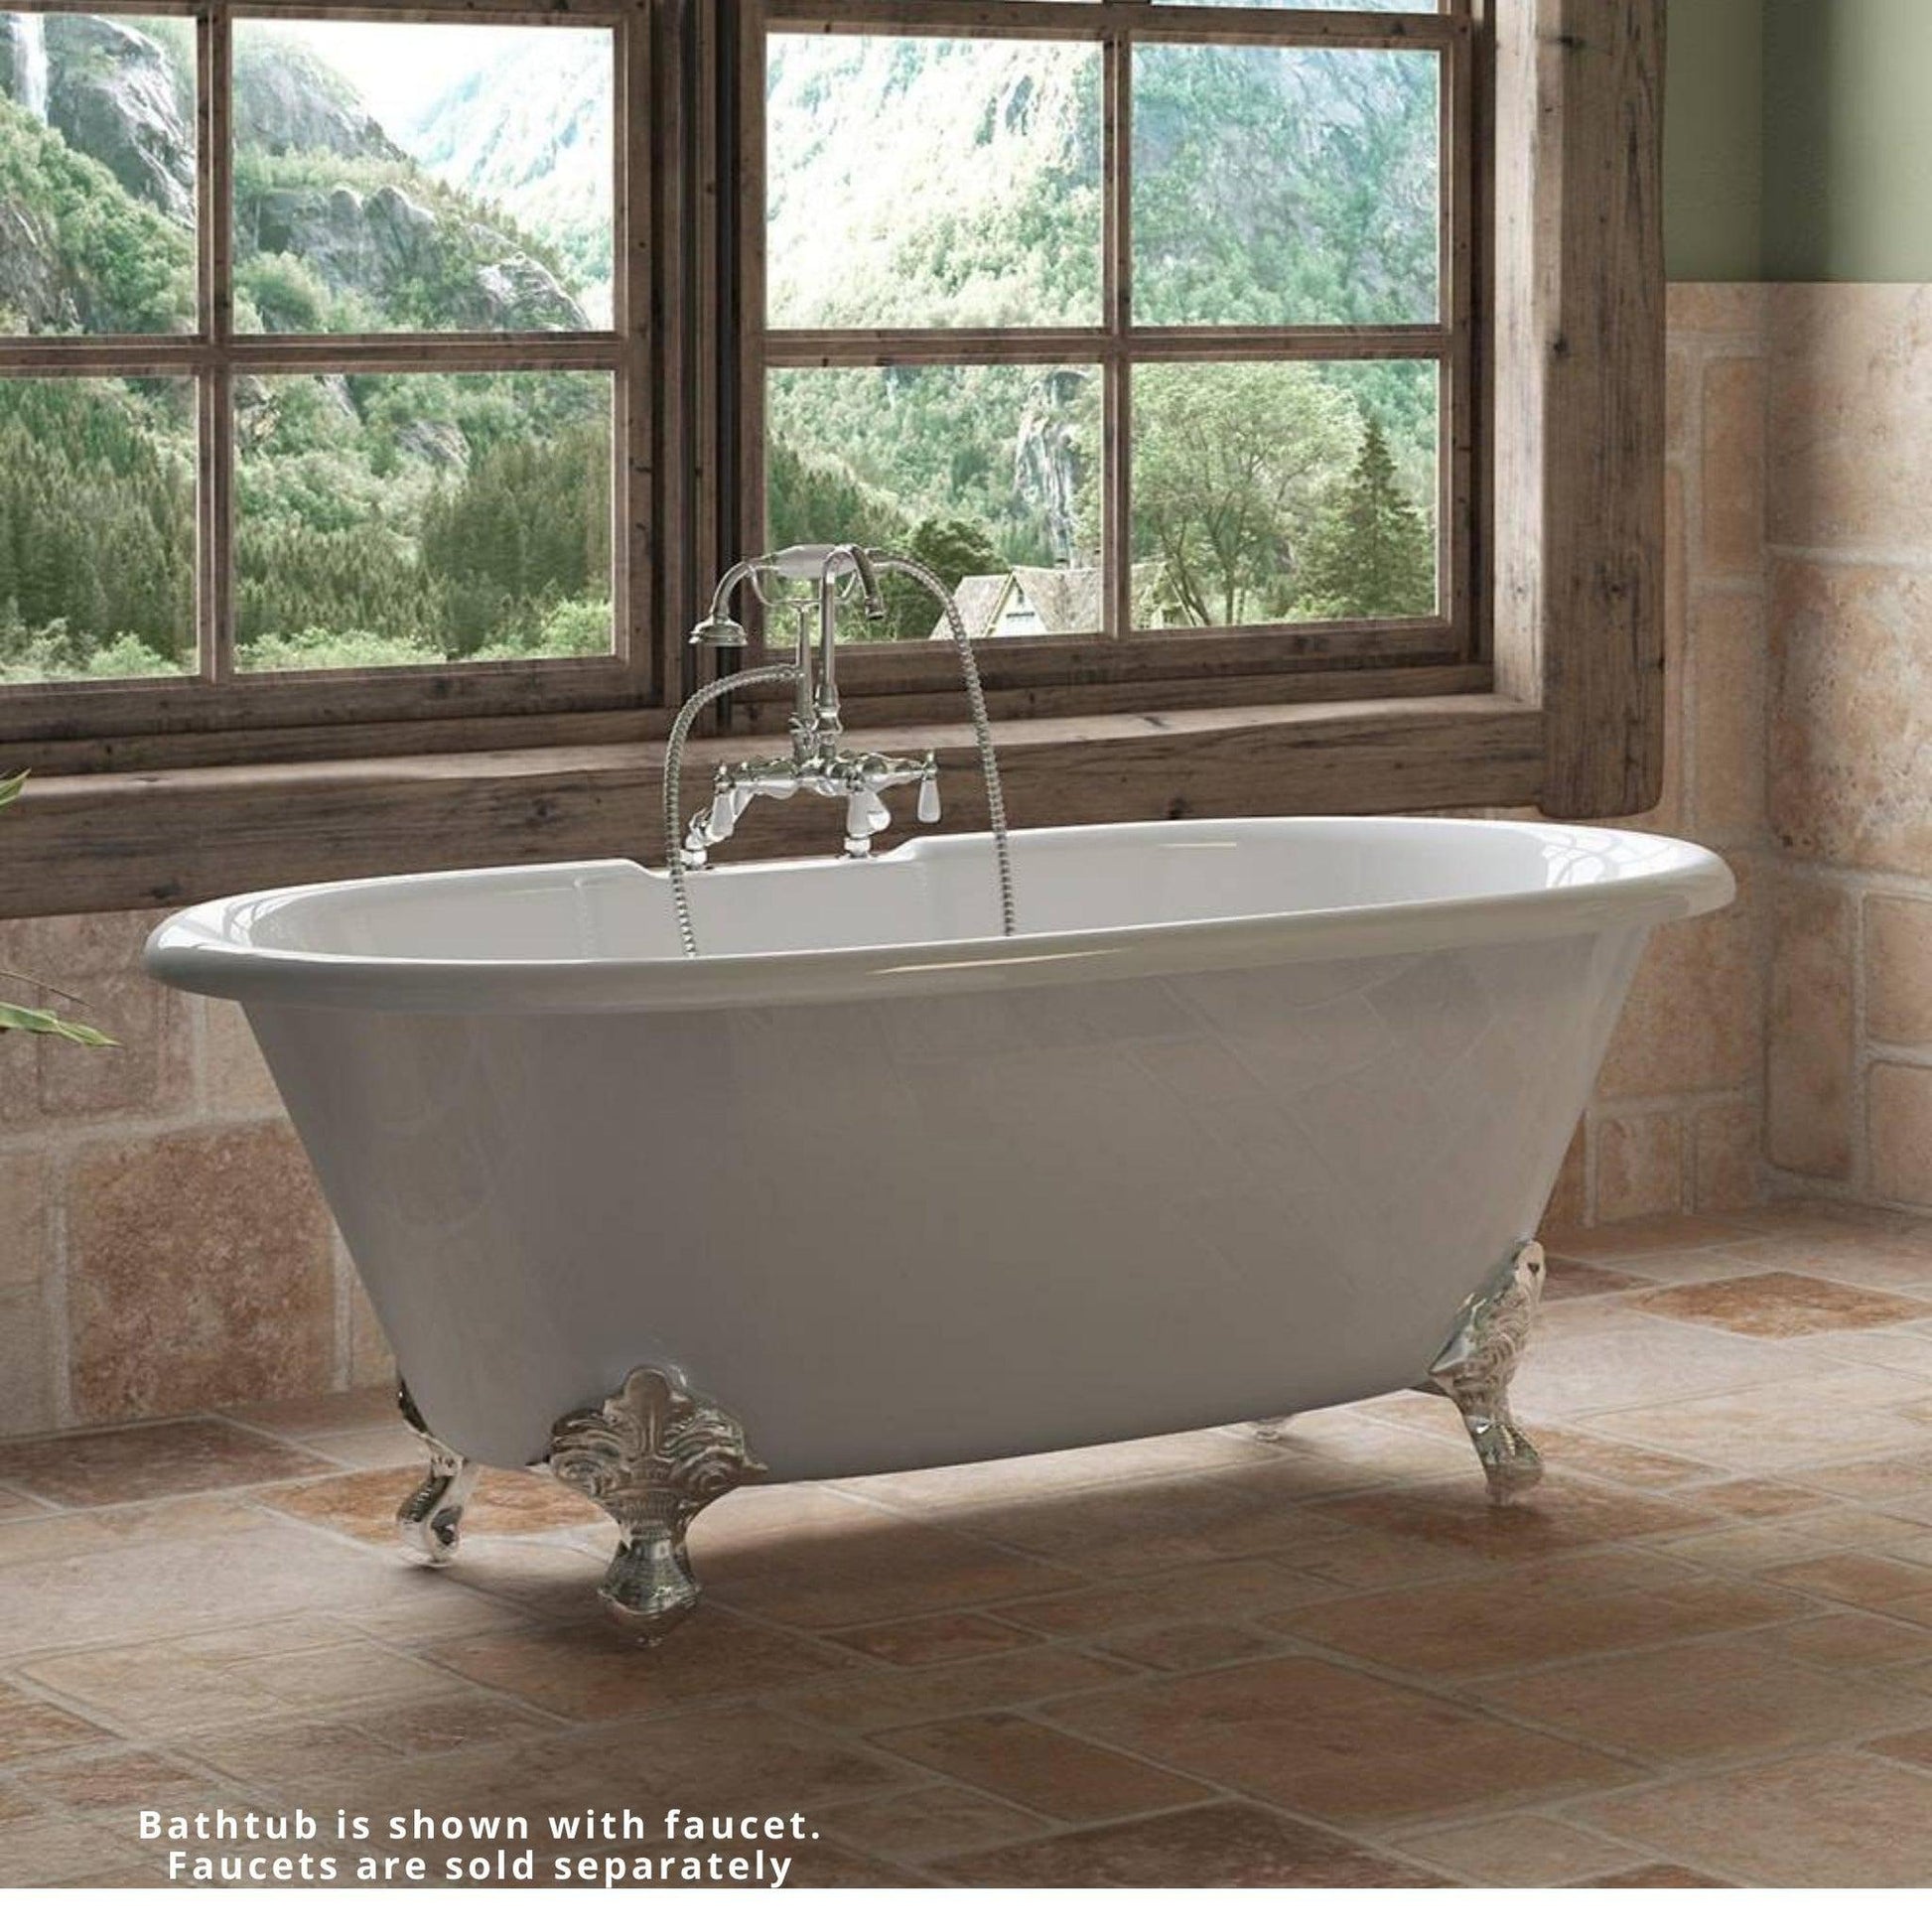 Cambridge Plumbing 60" White Cast Iron Double Ended Bathtub With Deck Holes With Polished Chrome Feet